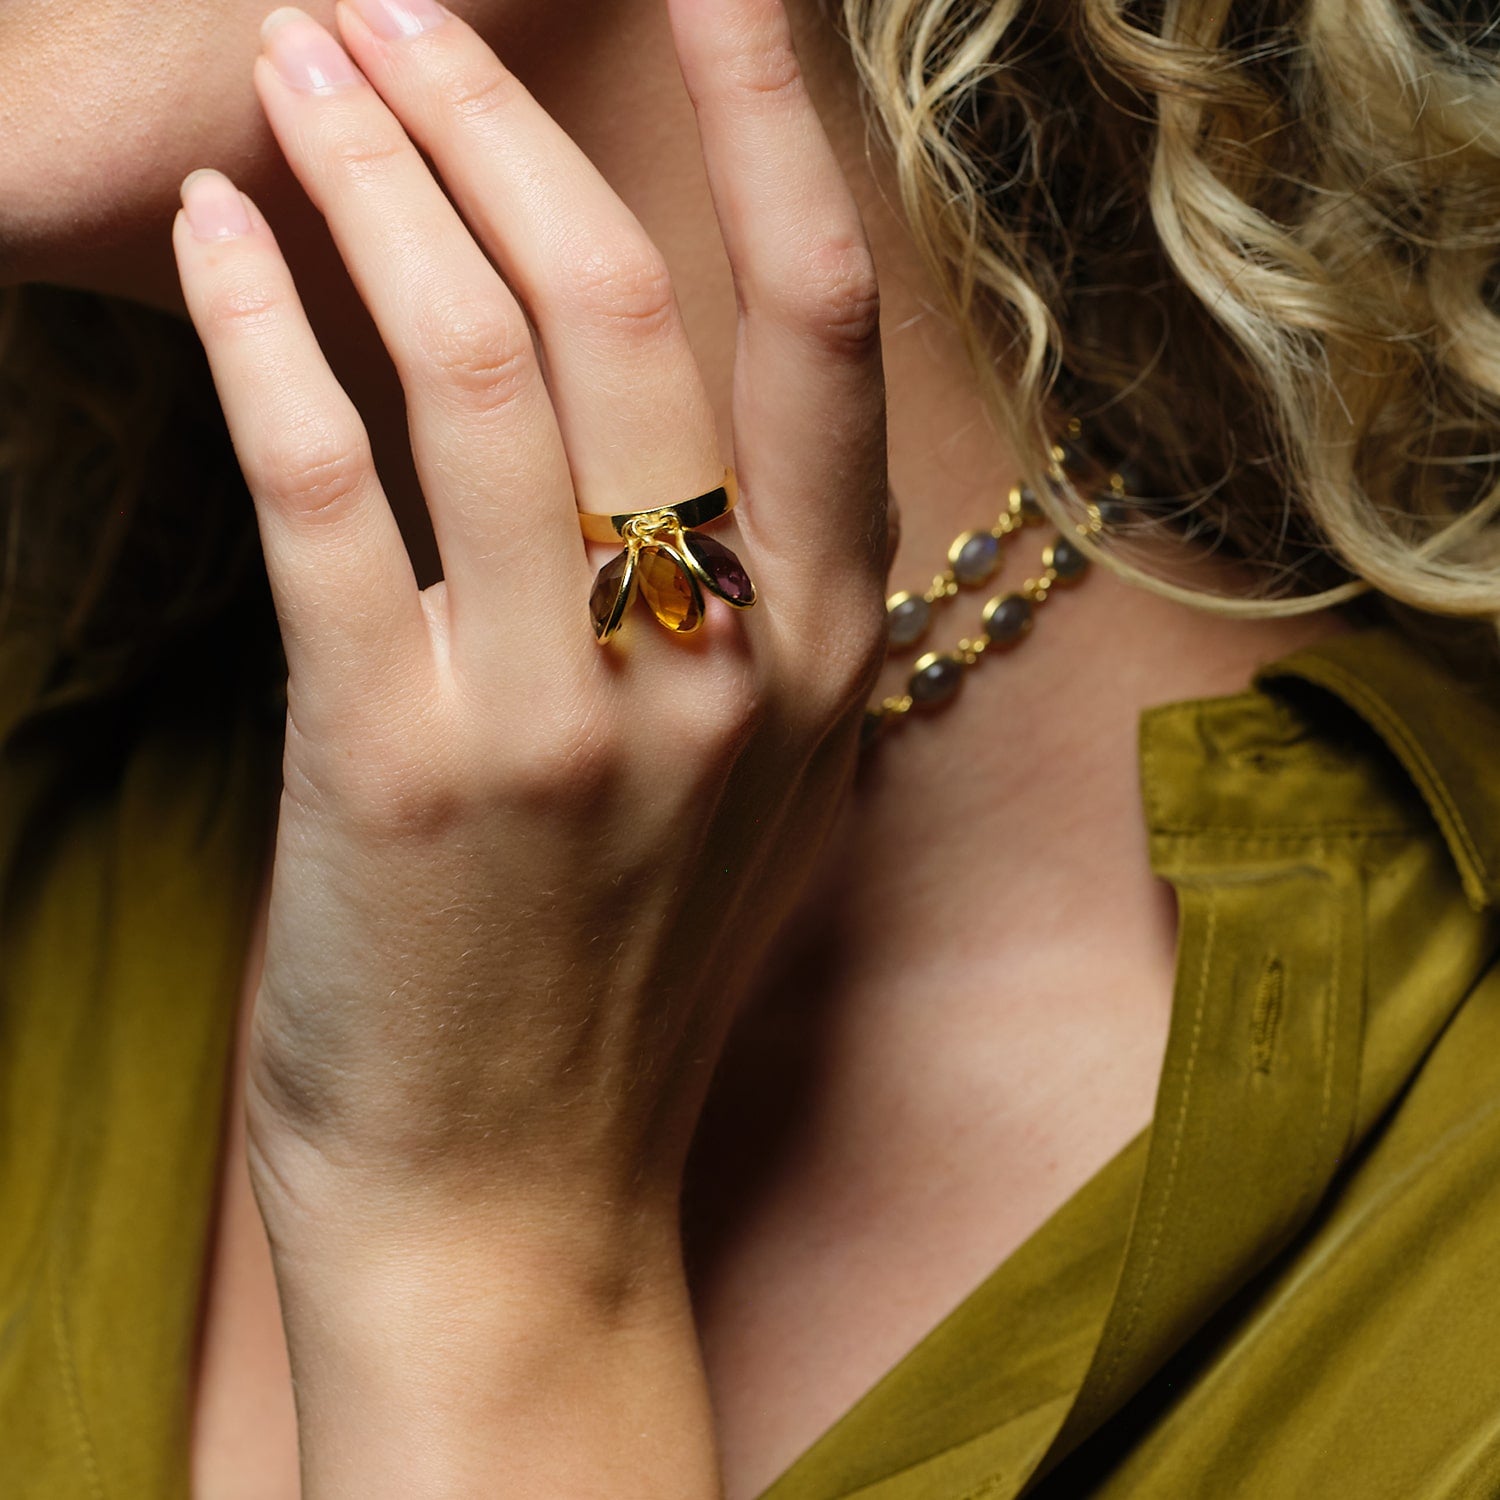 Add a little something special to your ring stack with this one. Made from recycled 18K gold vermeil, this size adjustable ring adds a statement with three gemstones: Amethyst, citrine and smokey quartz.The perfect burst of colour for any outfit.&nbsp;